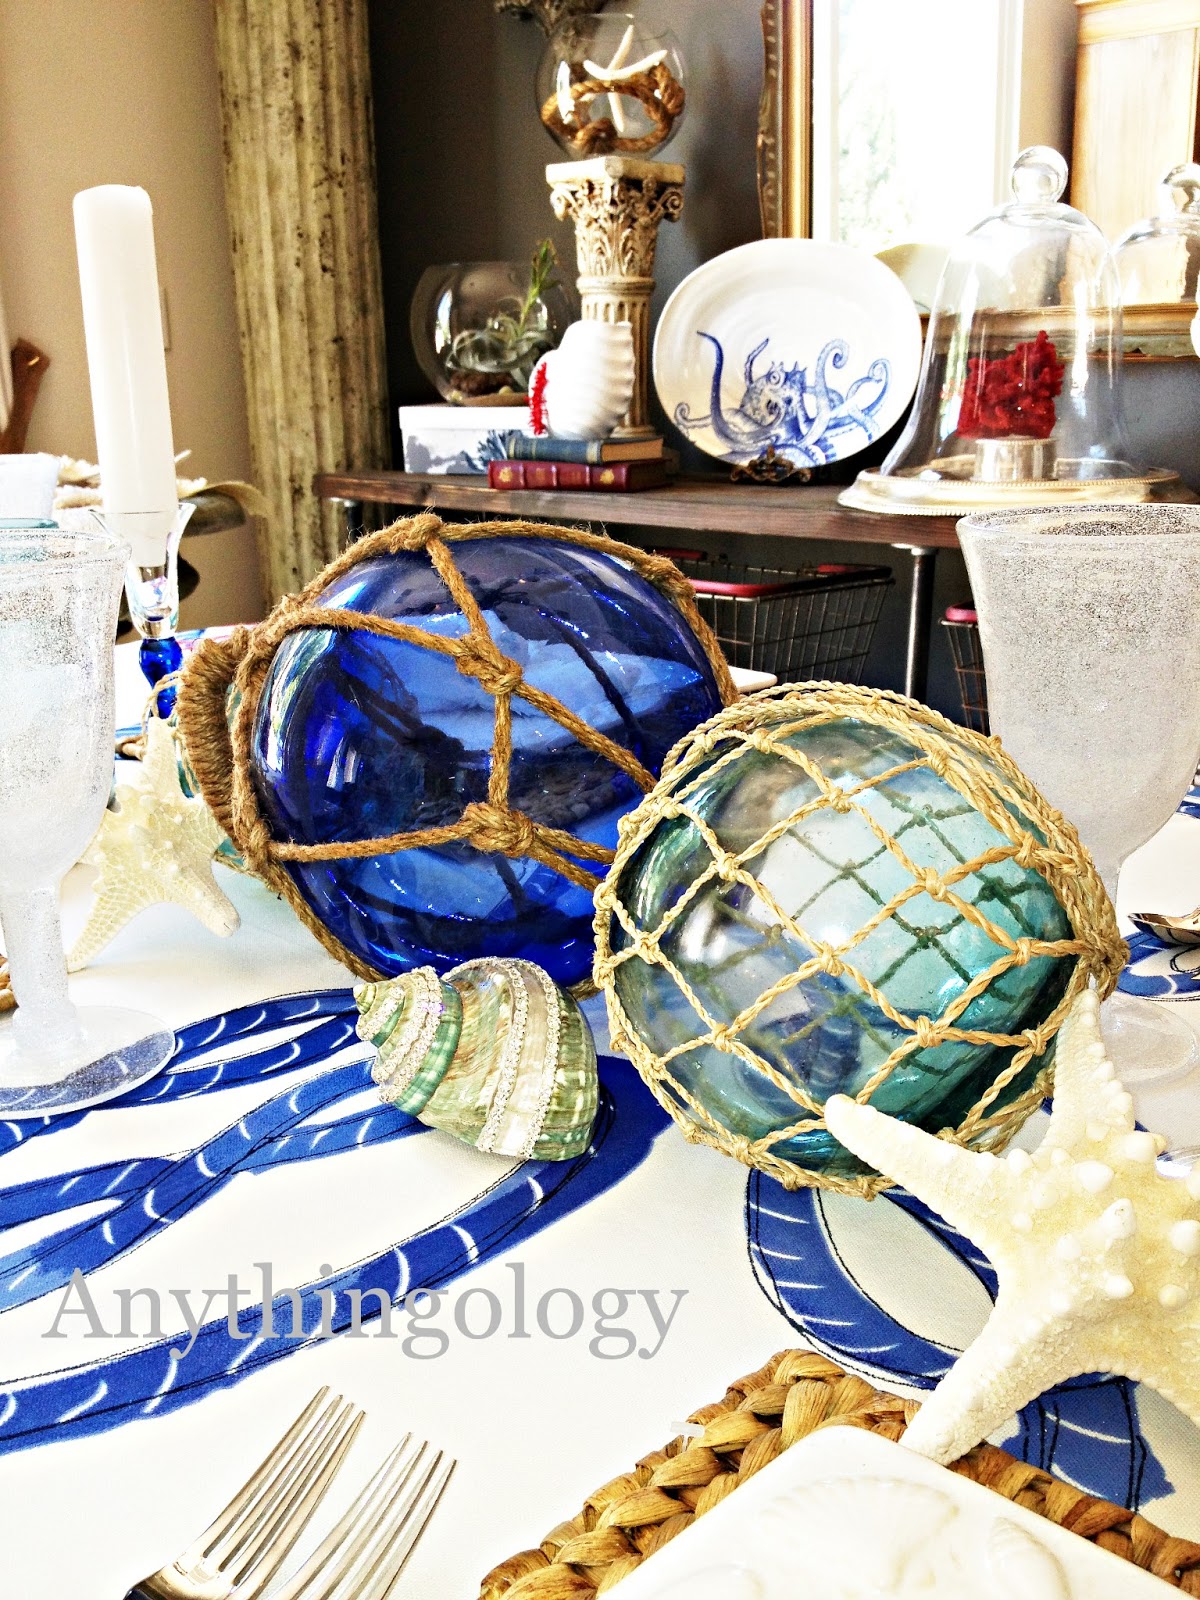 Anythingology: Nautical Dinner Party